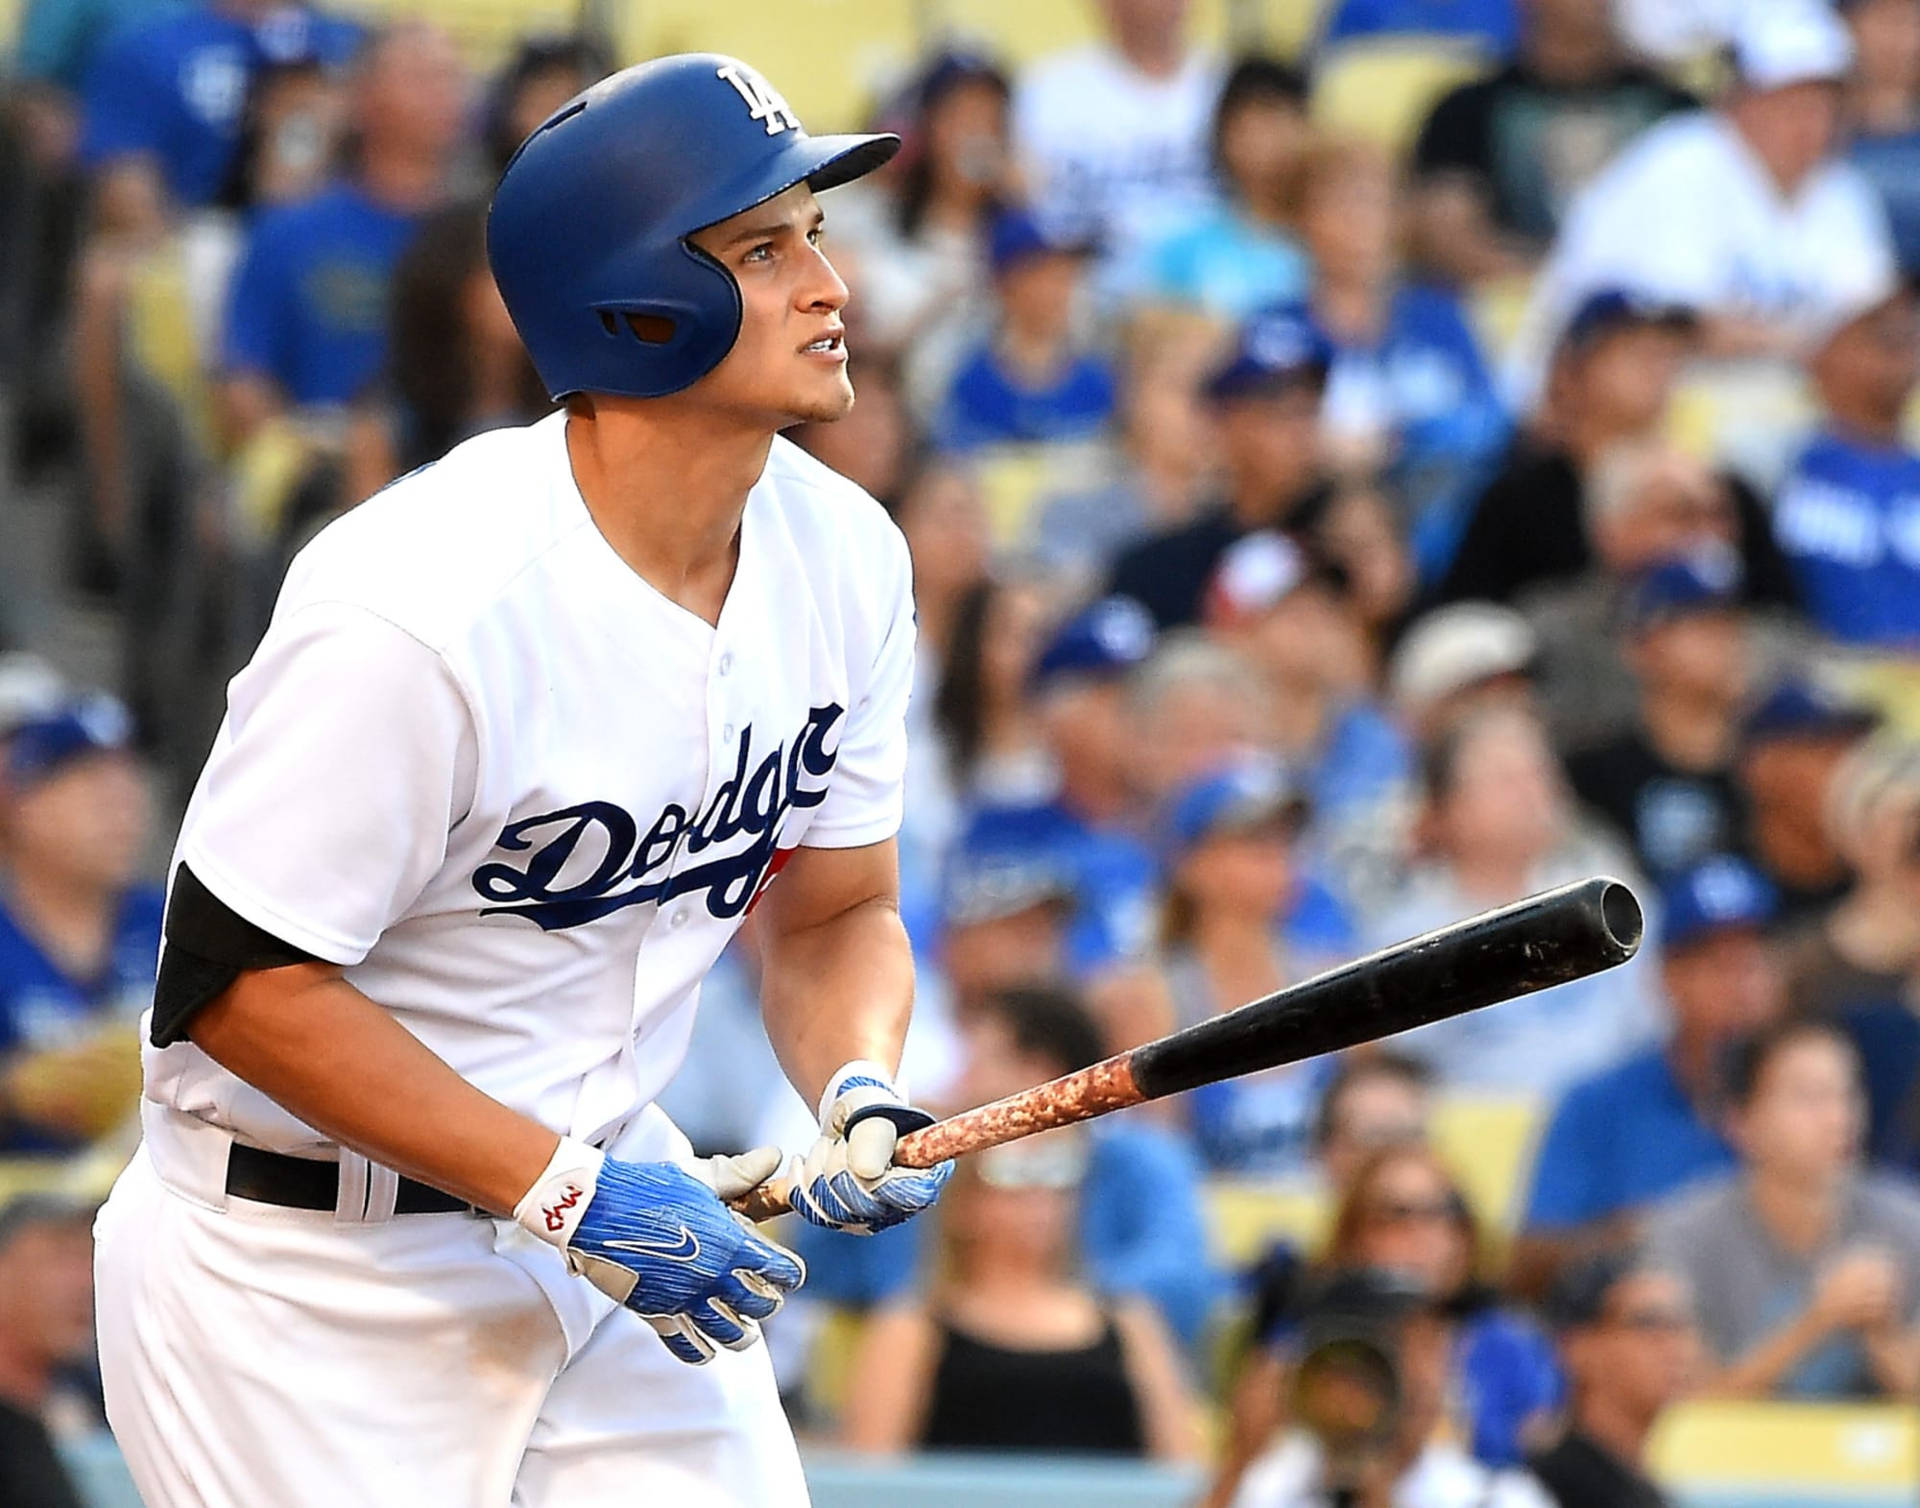 Corey Seager Holding Bat In Front Of Fans Wallpaper